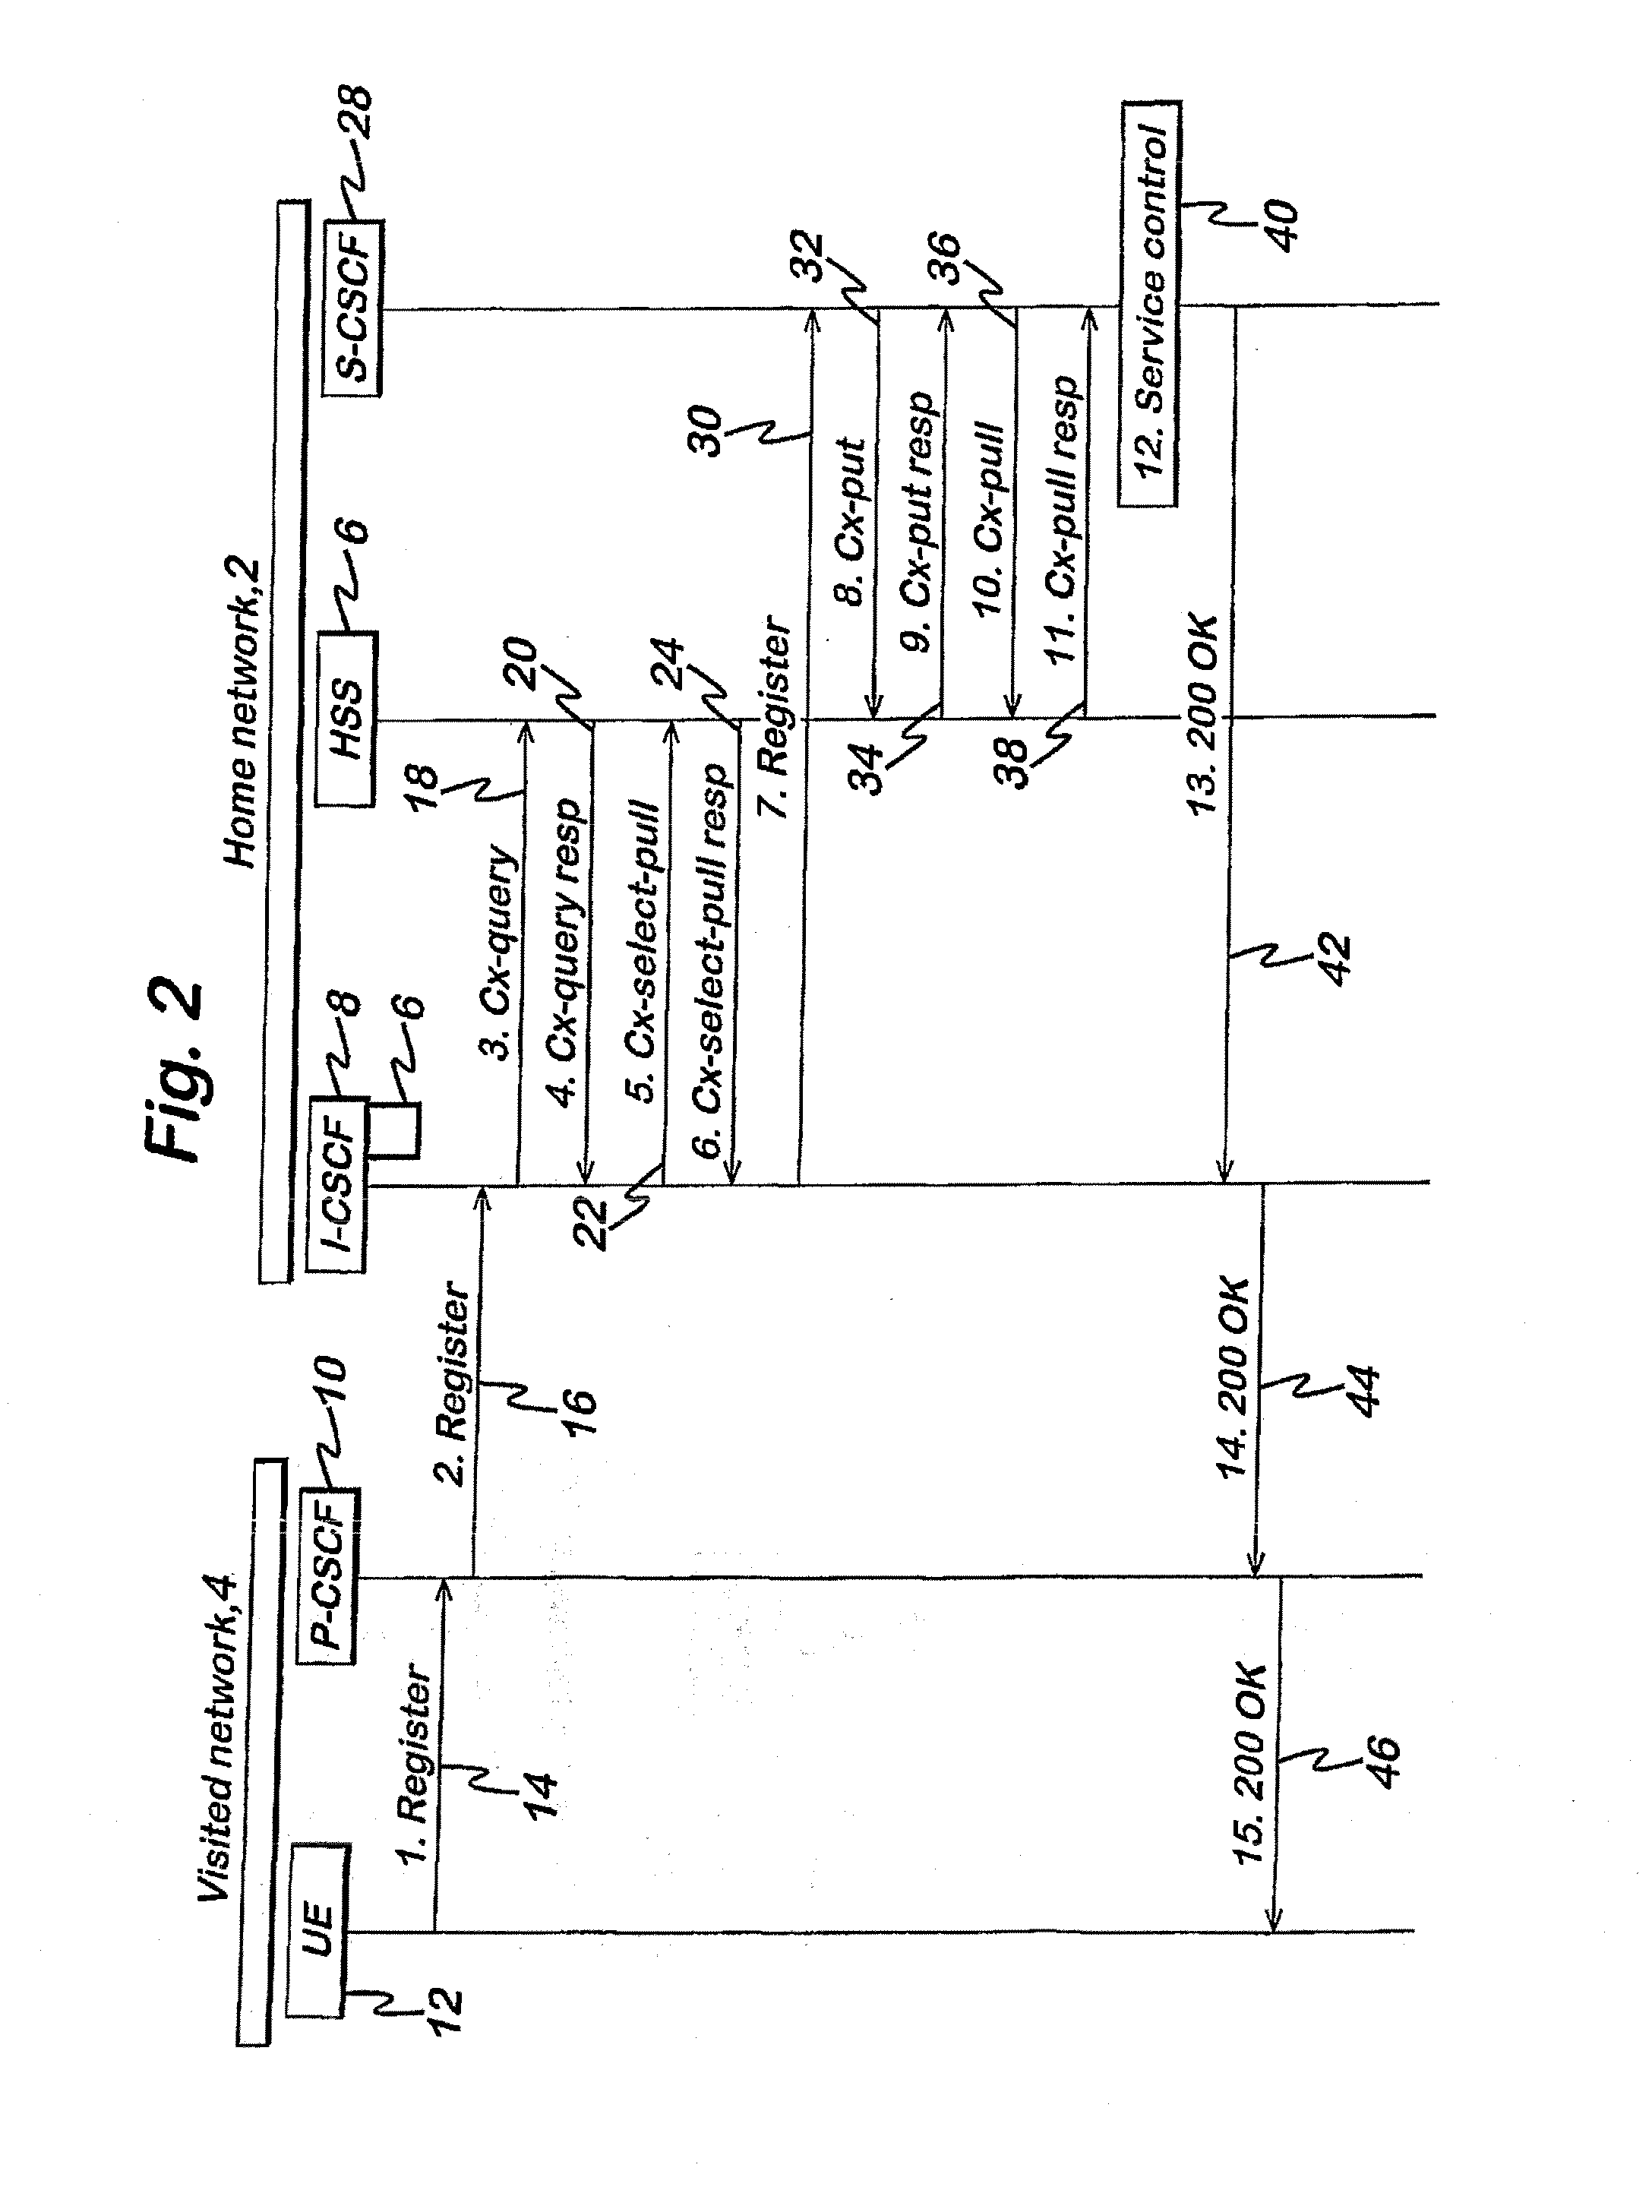 Allocation of a call state control function to a subscriber